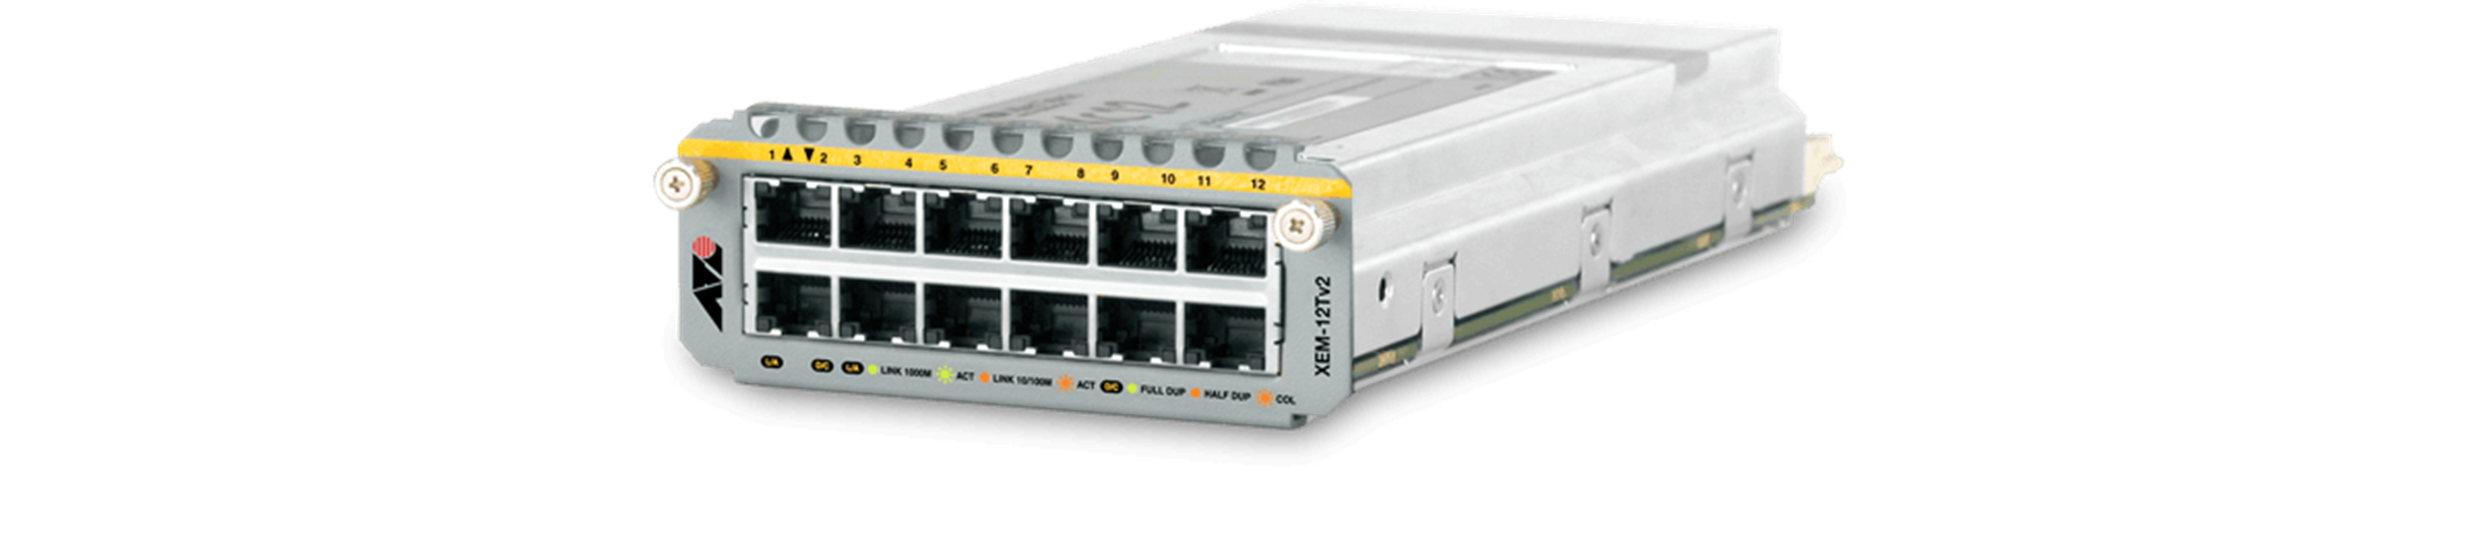 AT-SBx908 series - Advanced  Stackable Layer 3 Gigabit SwitchBlade